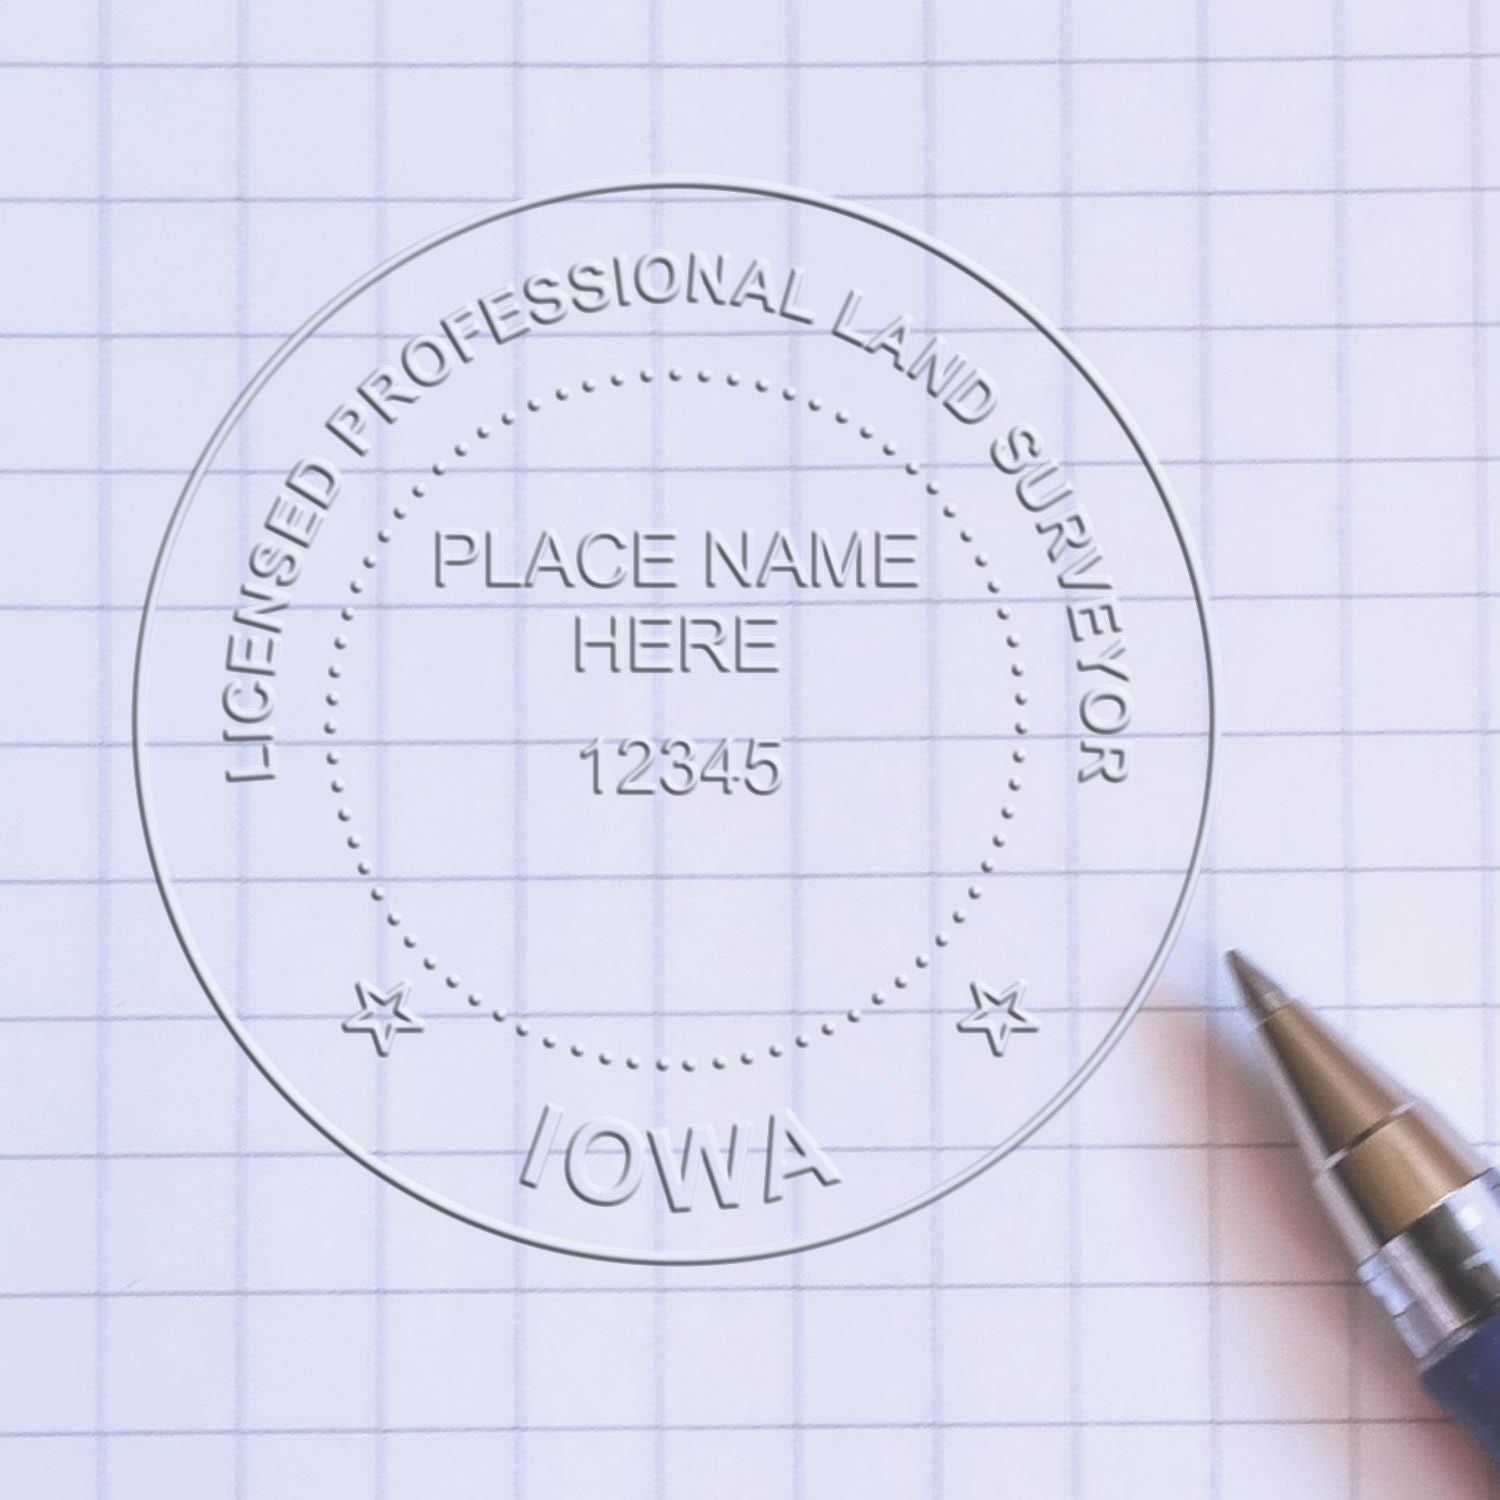 The main image for the Iowa Desk Surveyor Seal Embosser depicting a sample of the imprint and electronic files